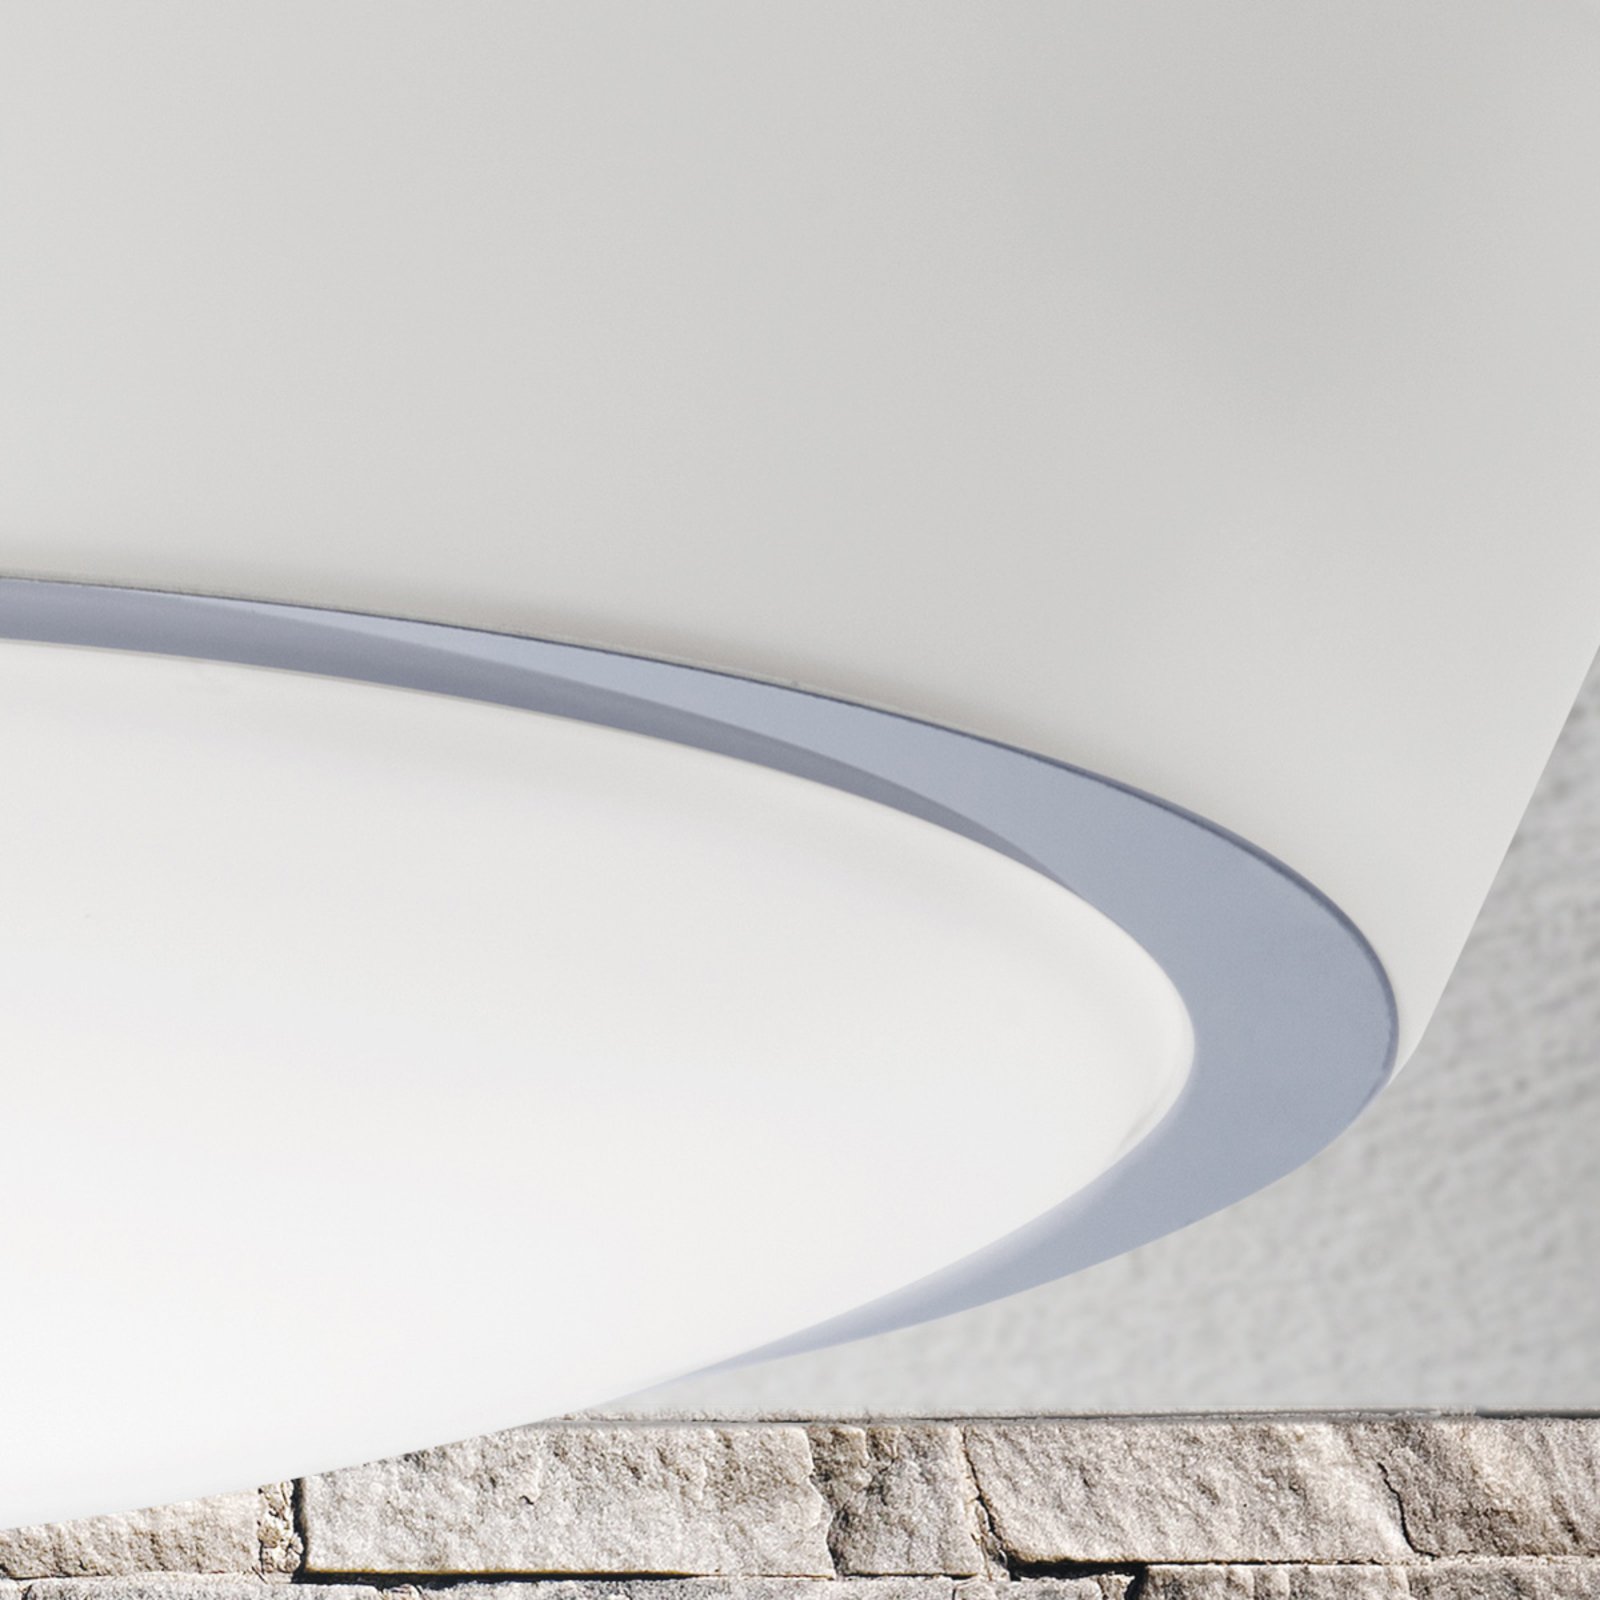 Glas ceiling light Pia with IP44, 38 cm